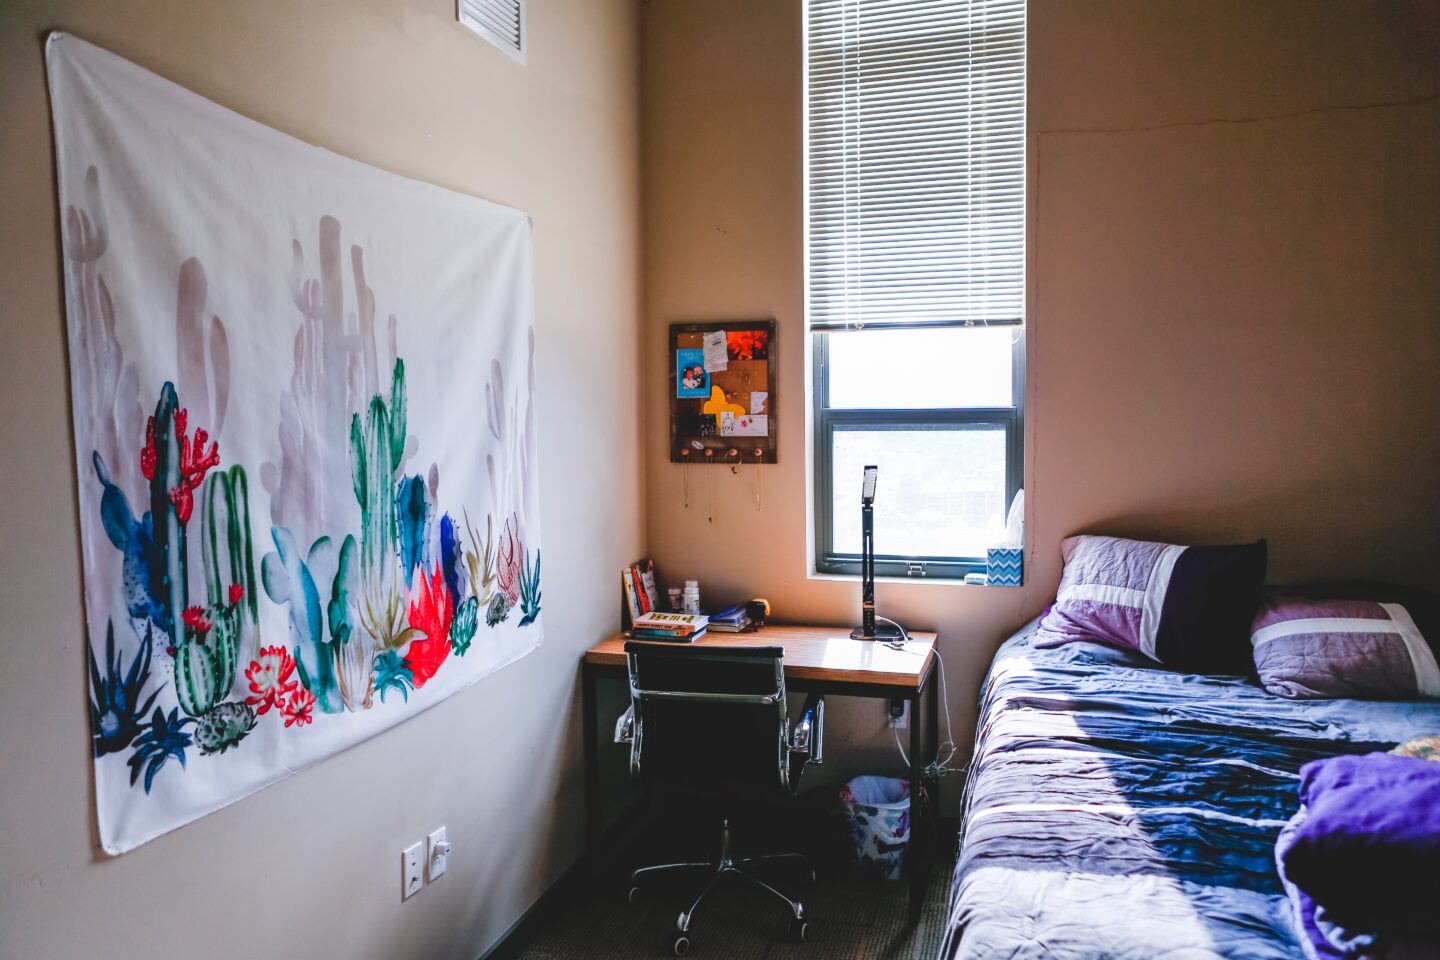 How To Cool A Dorm Room Without Air Conditioning